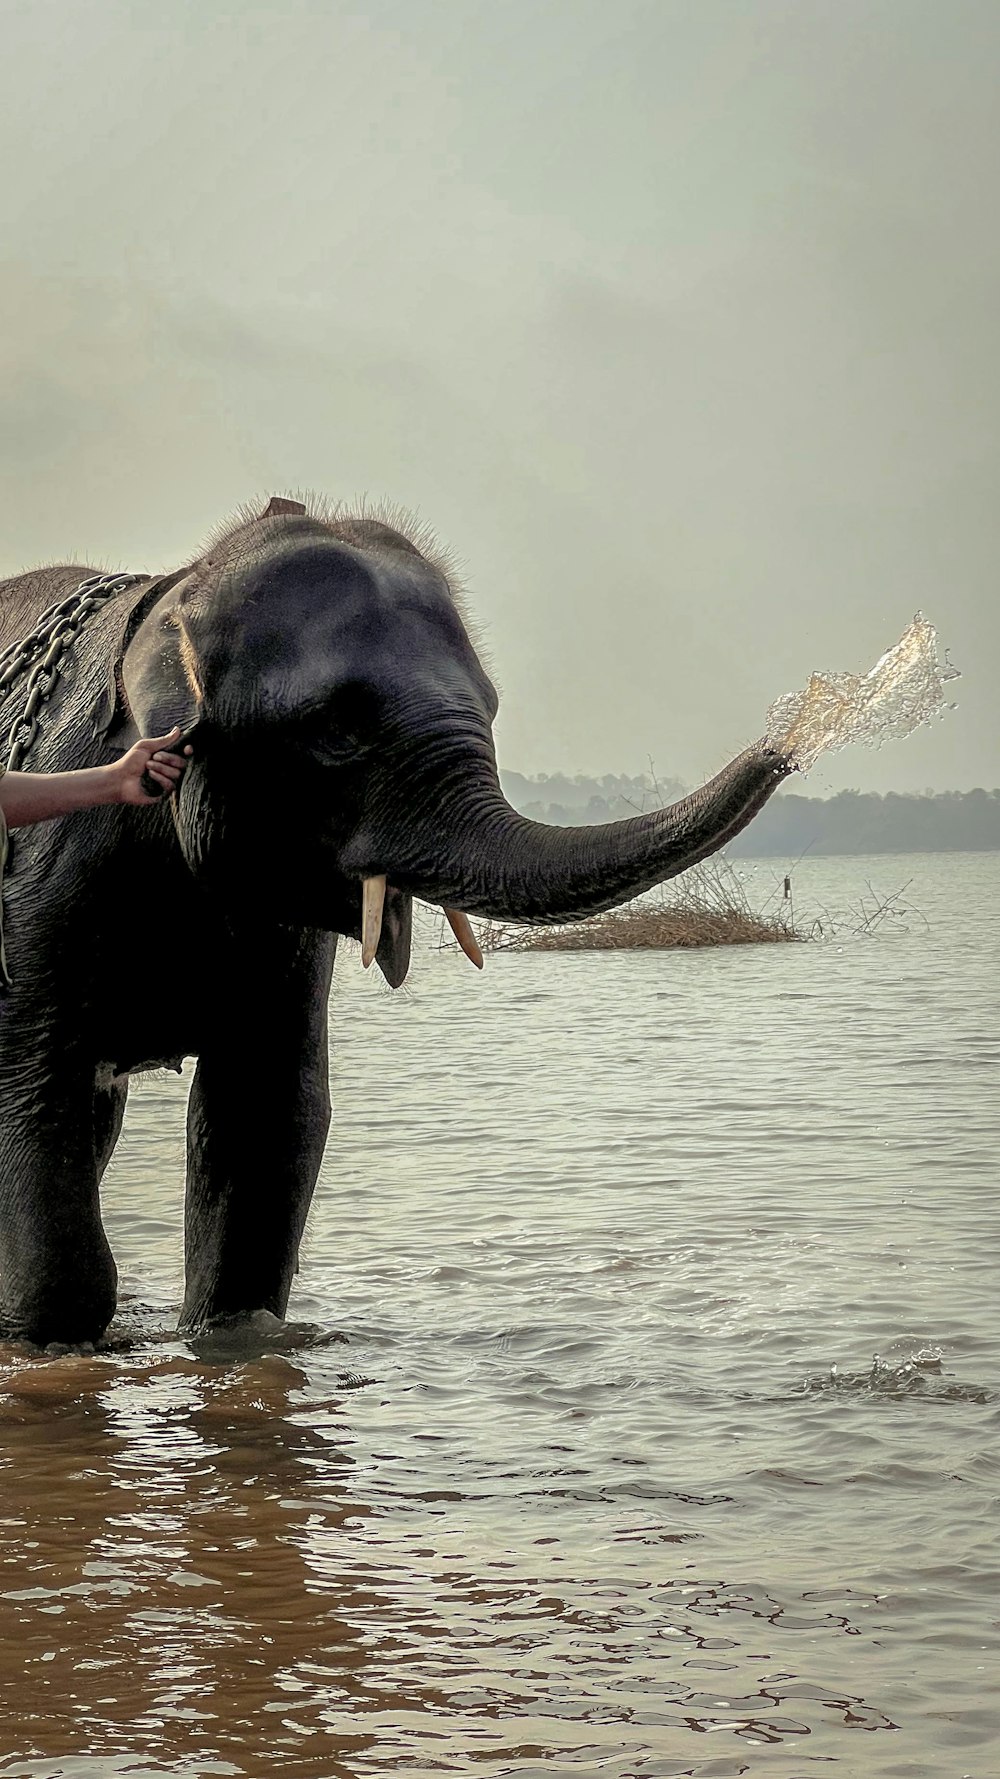 an elephant with its trunk in the water